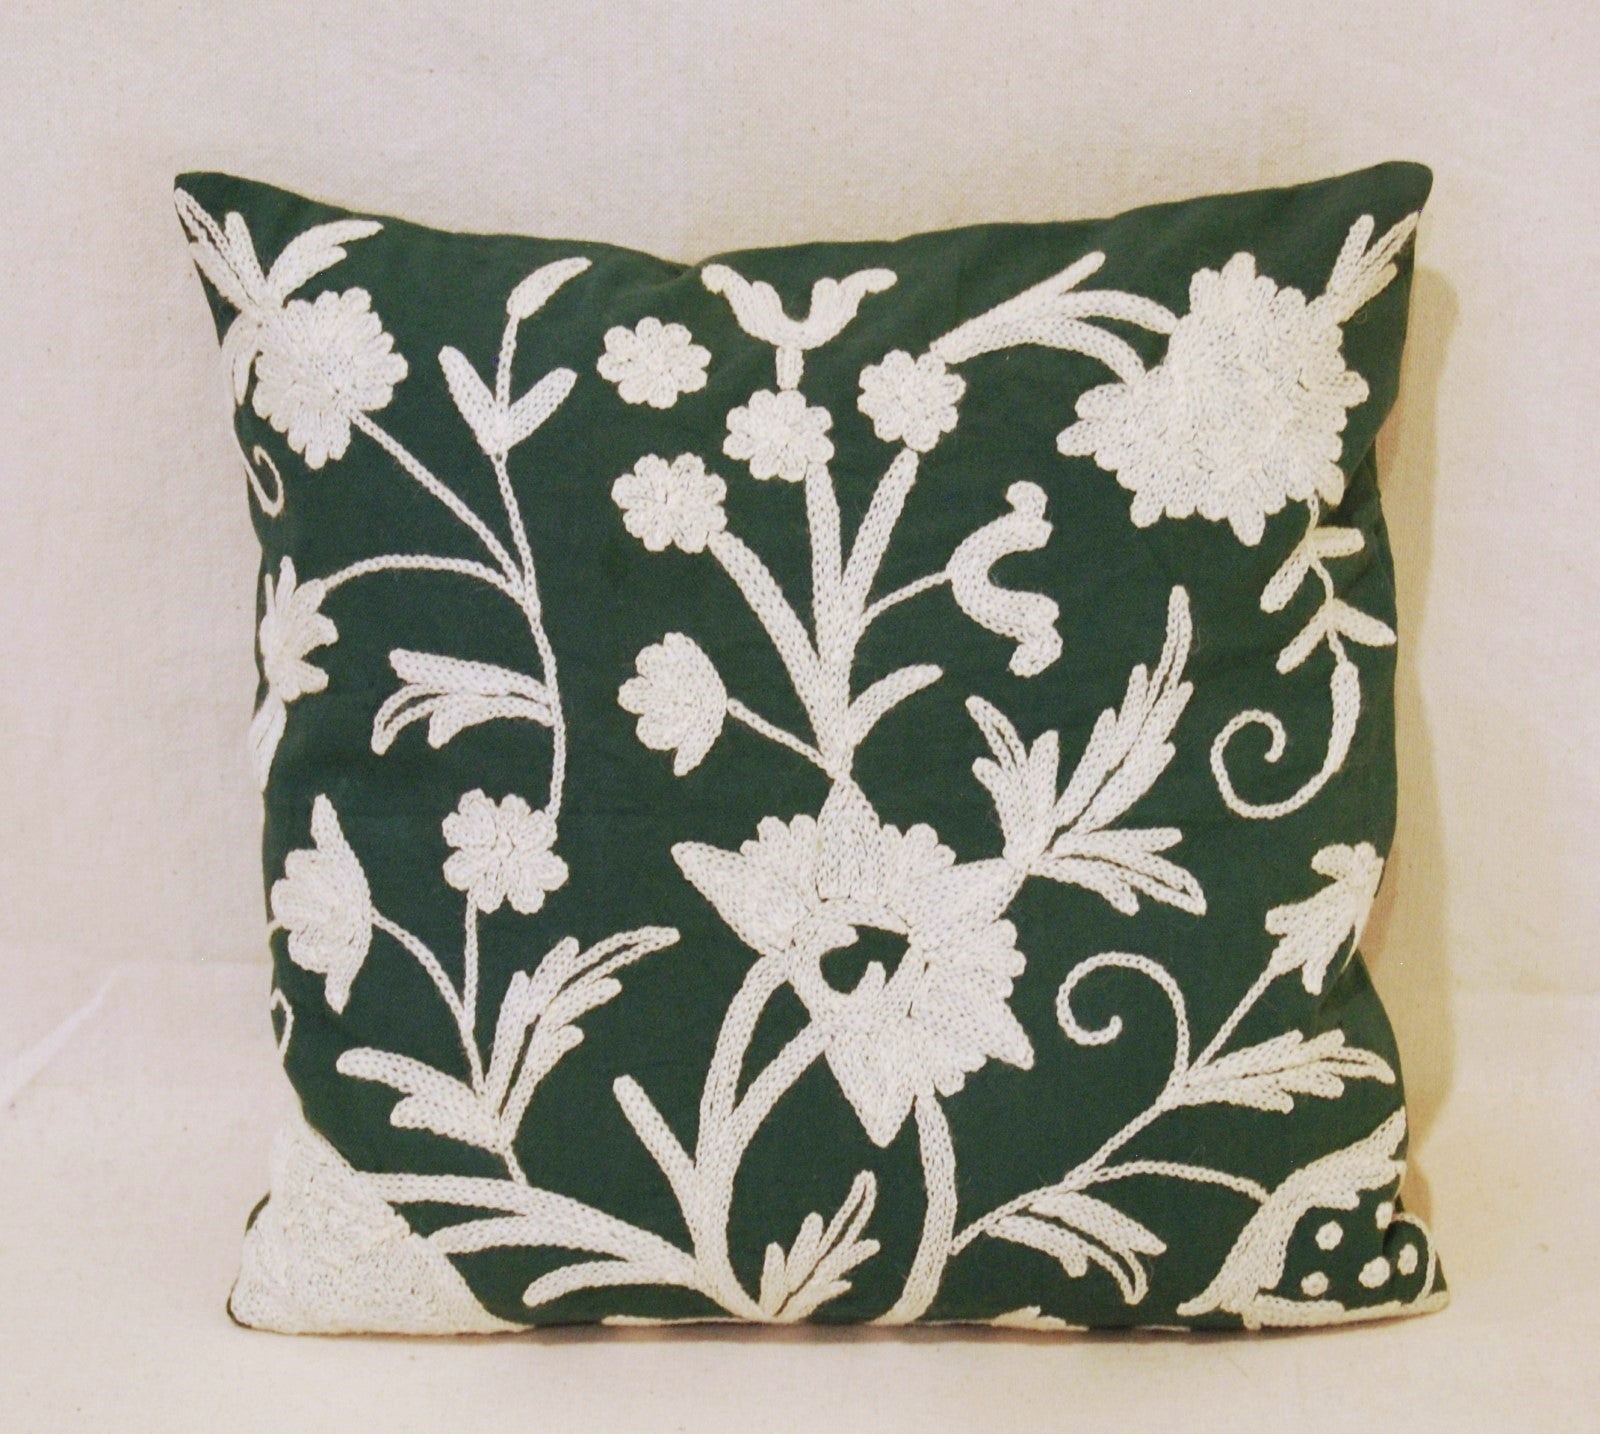 Crewel Wool on Cotton Throw Pillow Cushion Cover "Tree of Life", White on Green #CW451